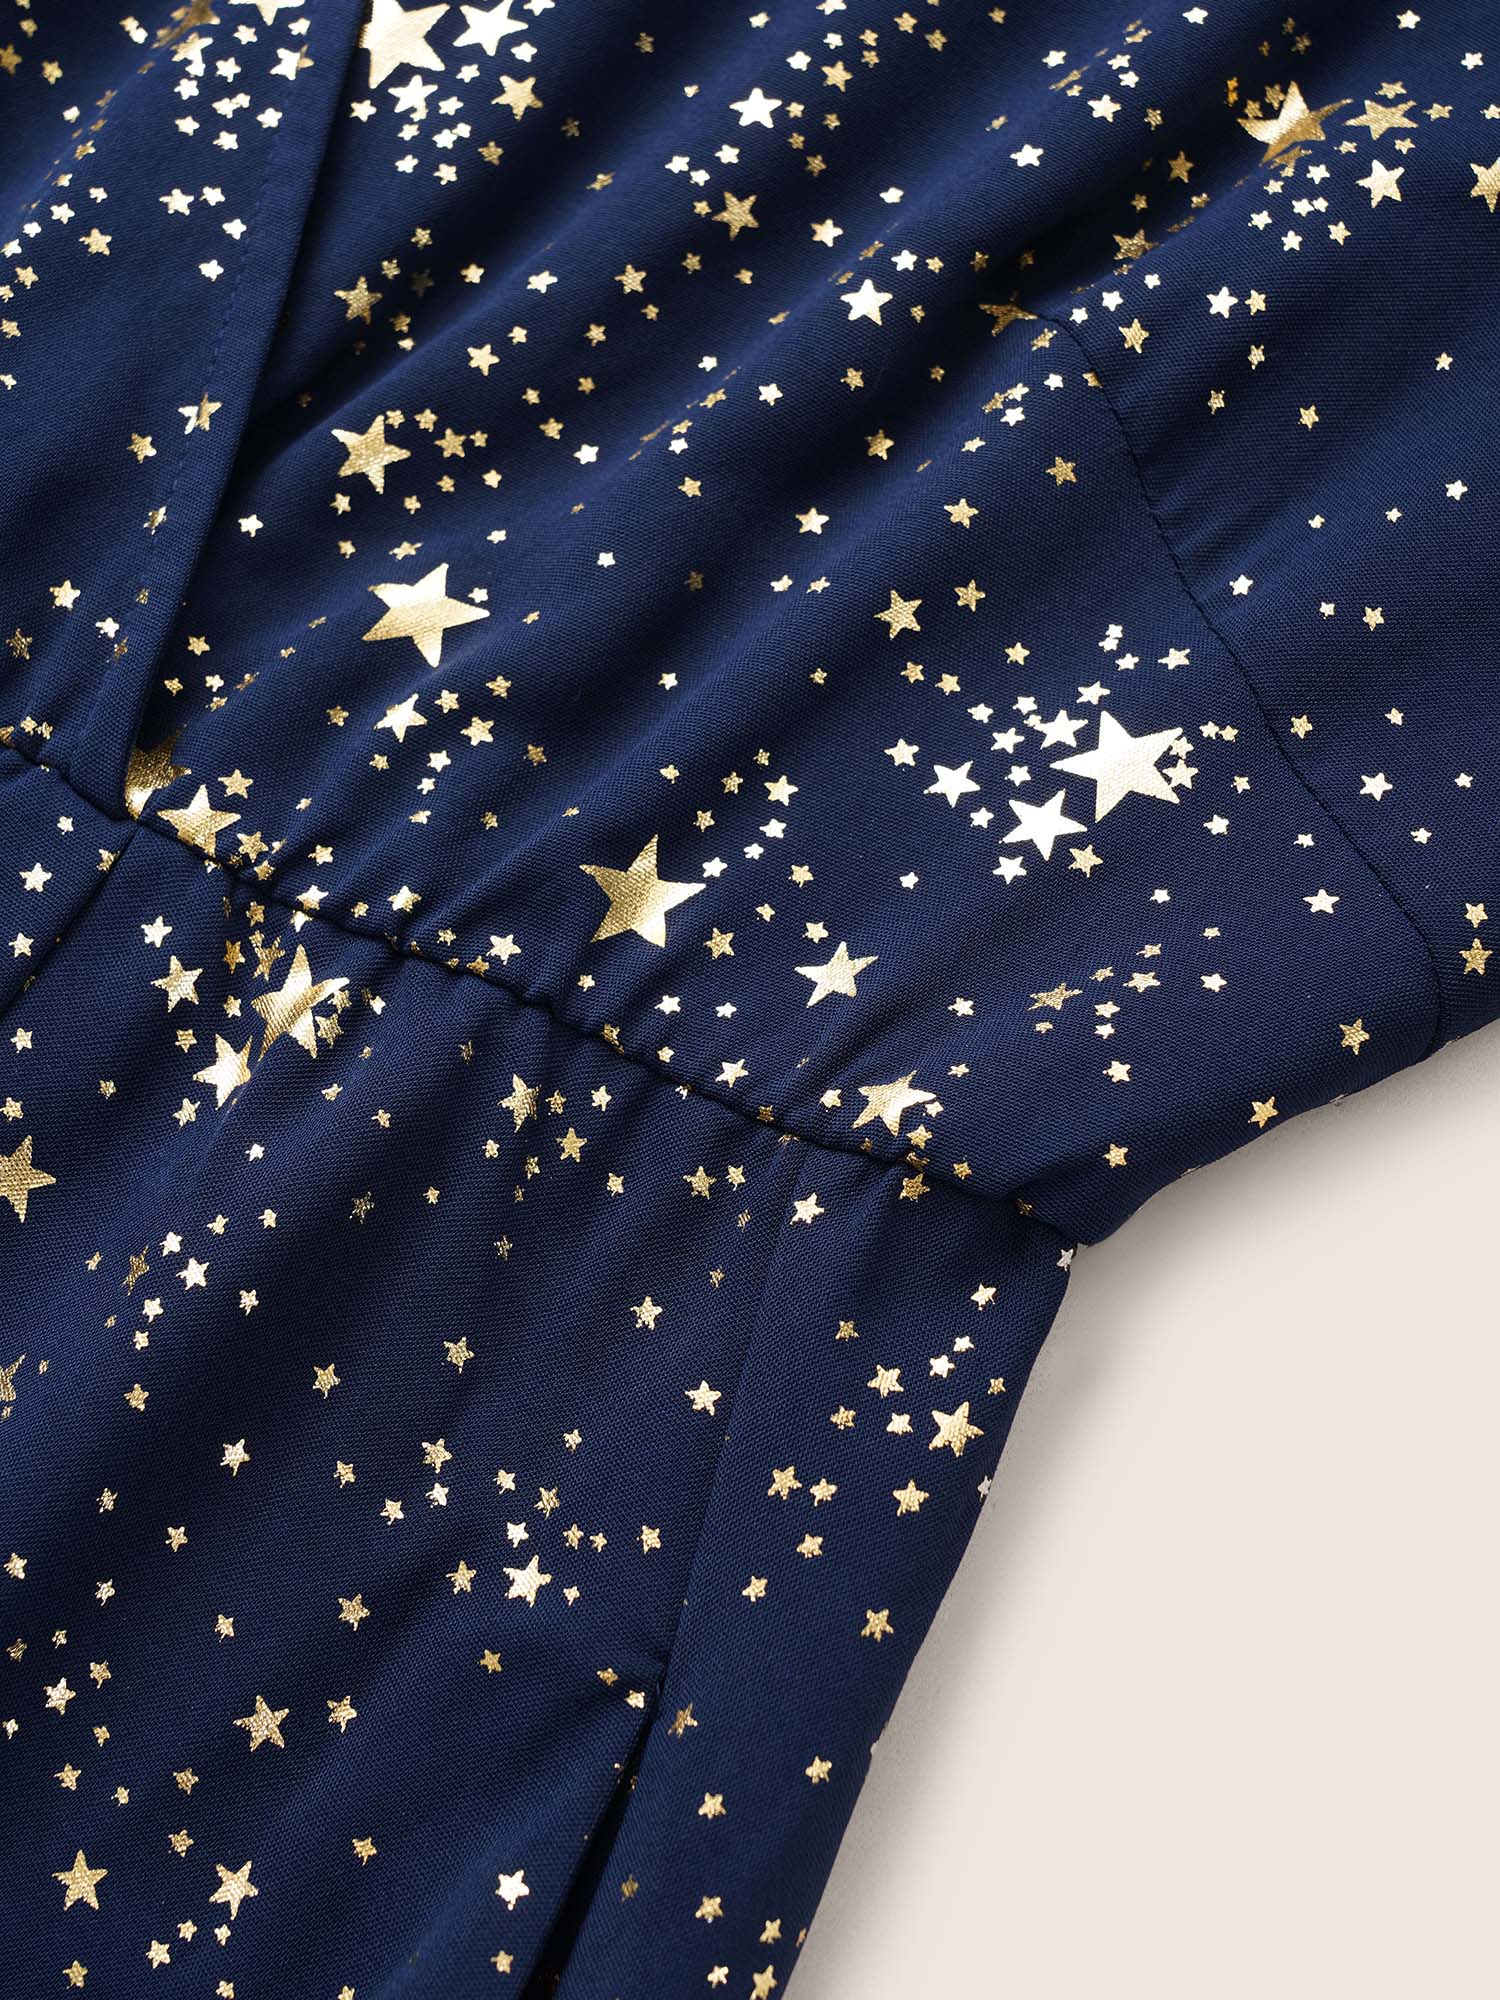 

Moon and Star Galaxy Print Plus Size Dress Women Party Pocket Ruffle Sleeve Short Sleeve V Neck Pocket Going out Long Dress BloomChic, Darkblue